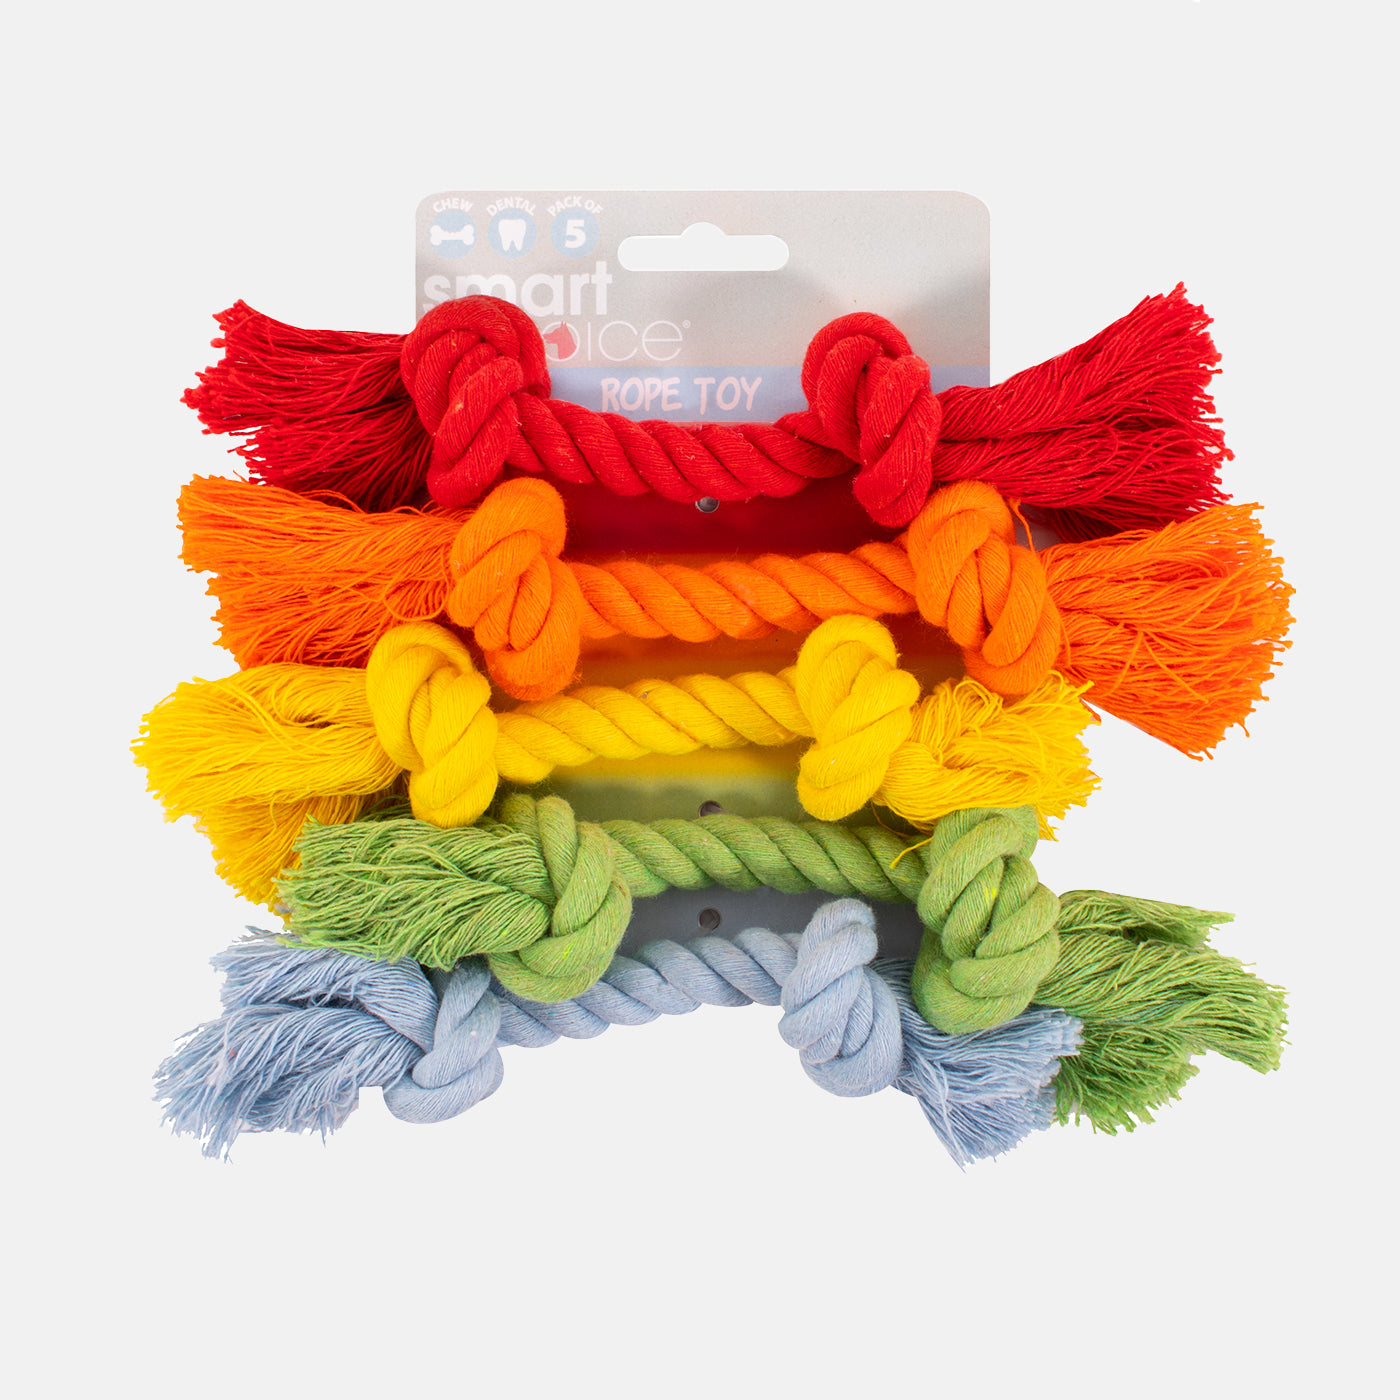 Small Dog & Puppy Rainbow Rope Tug Toys 5 Pack